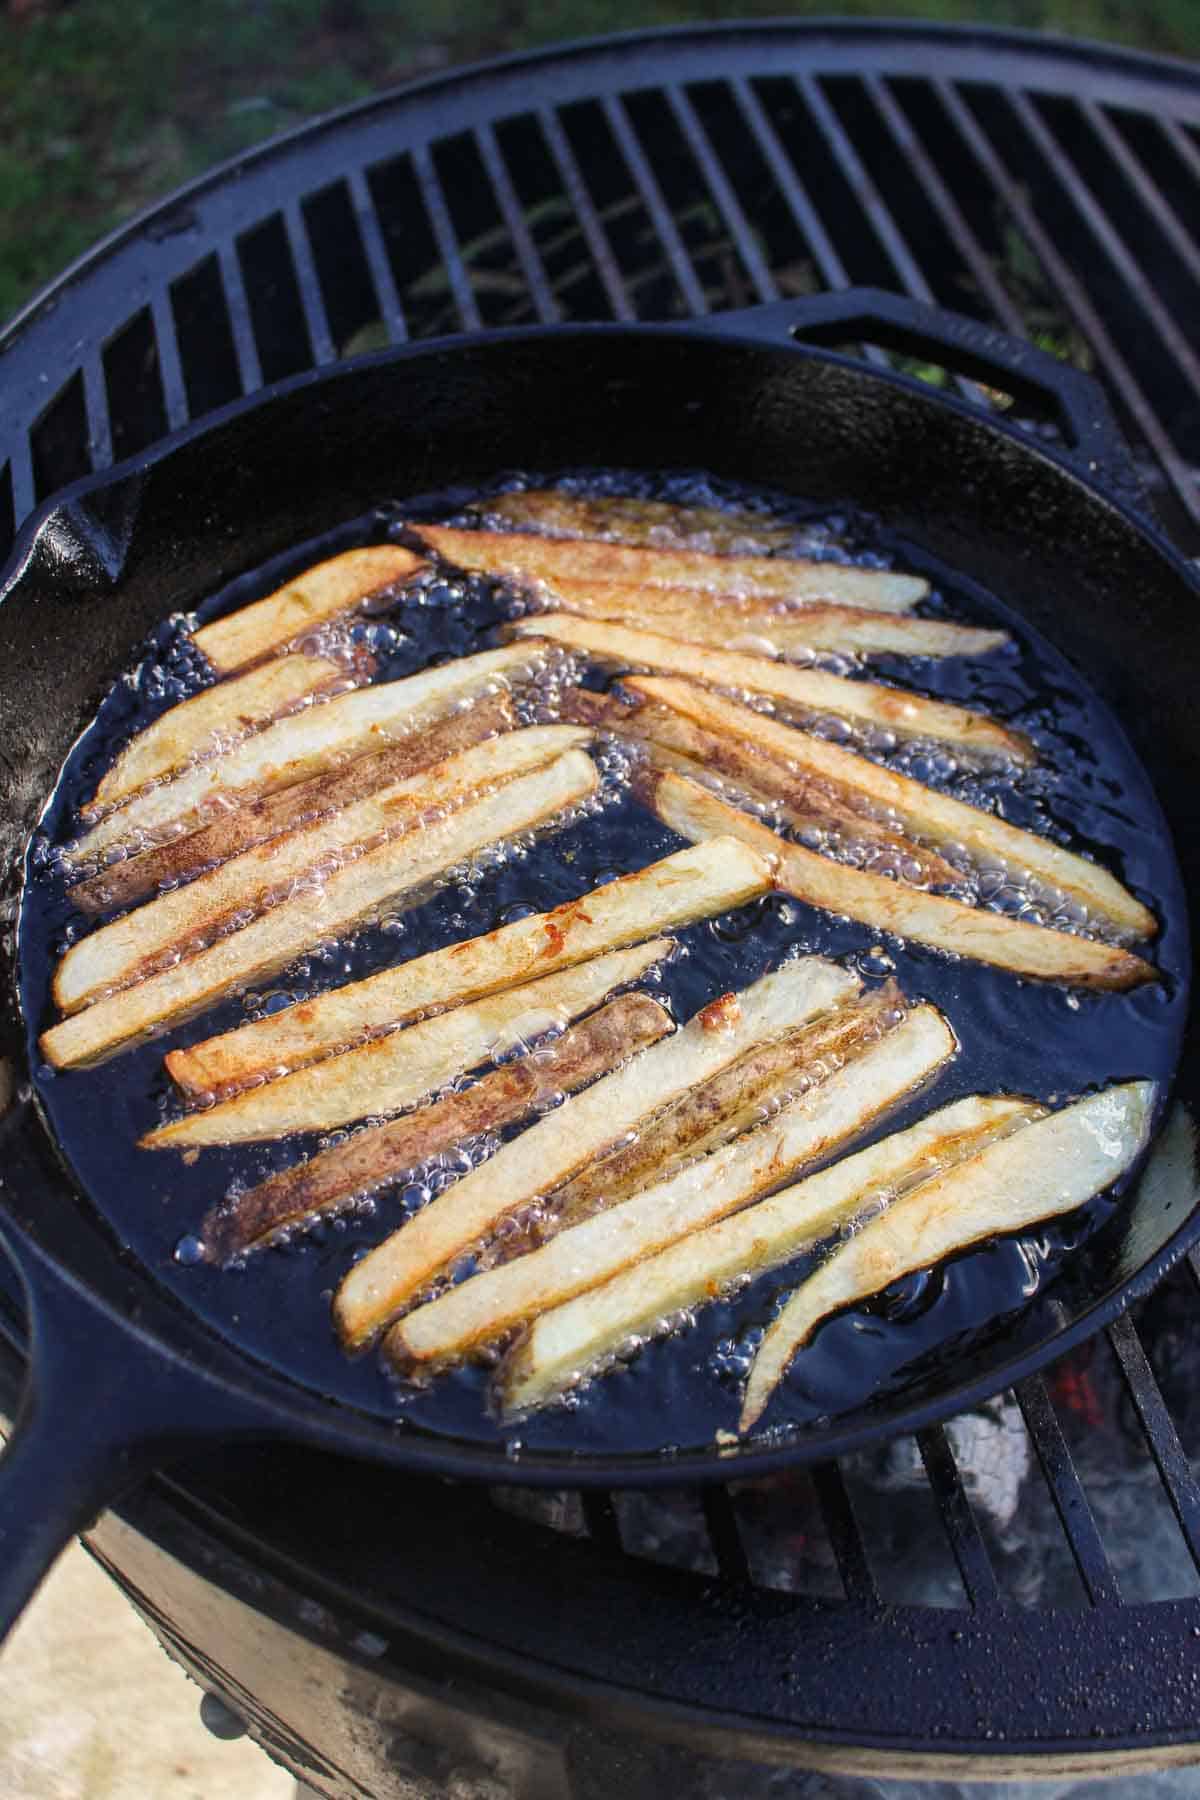 Frying fries as a side dish.